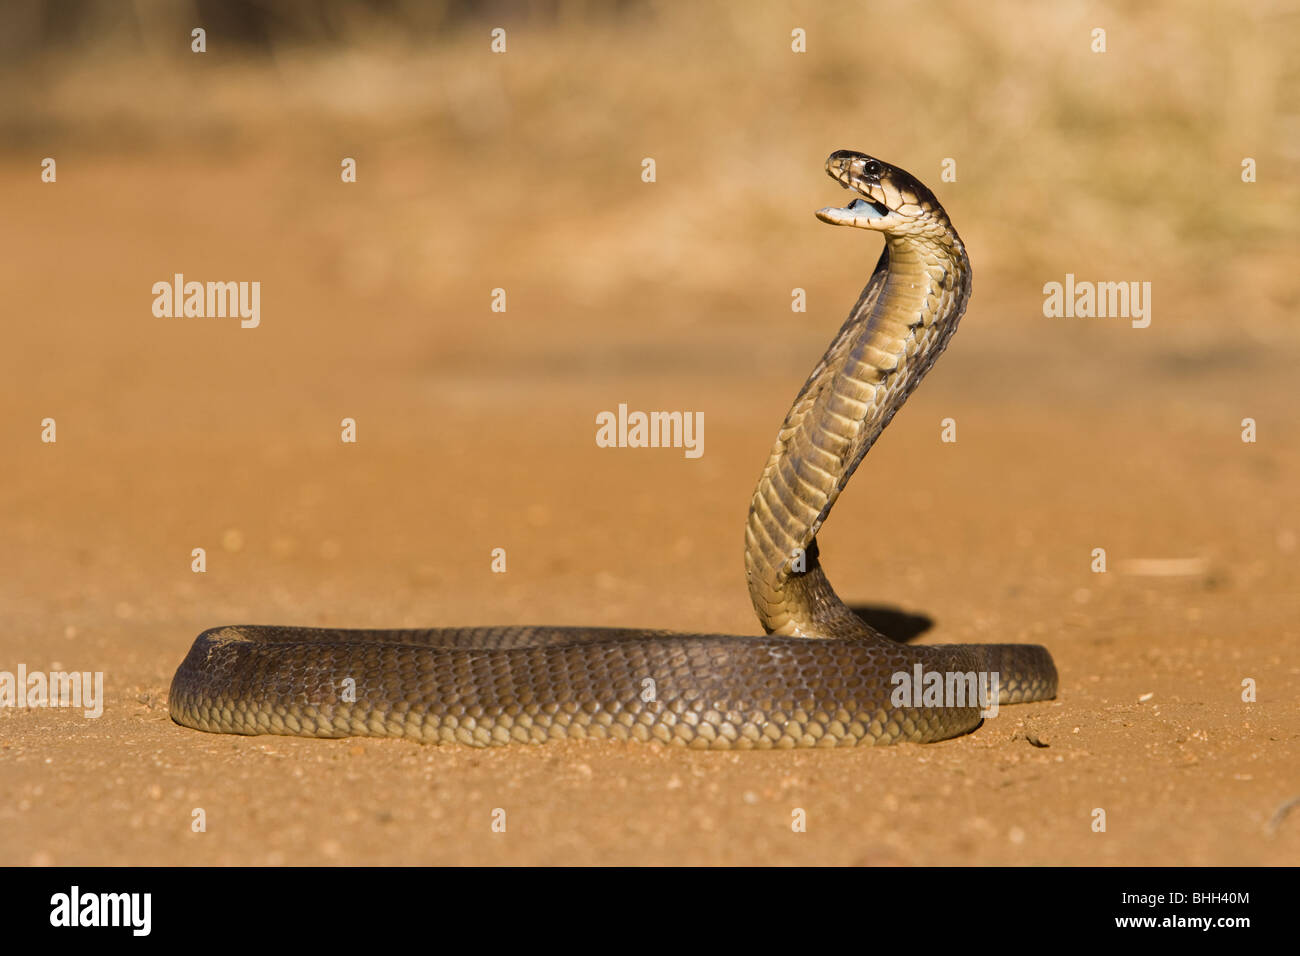 A snouted cobra (Naja annulifera) standing with hood up in a warning posture Stock Photo